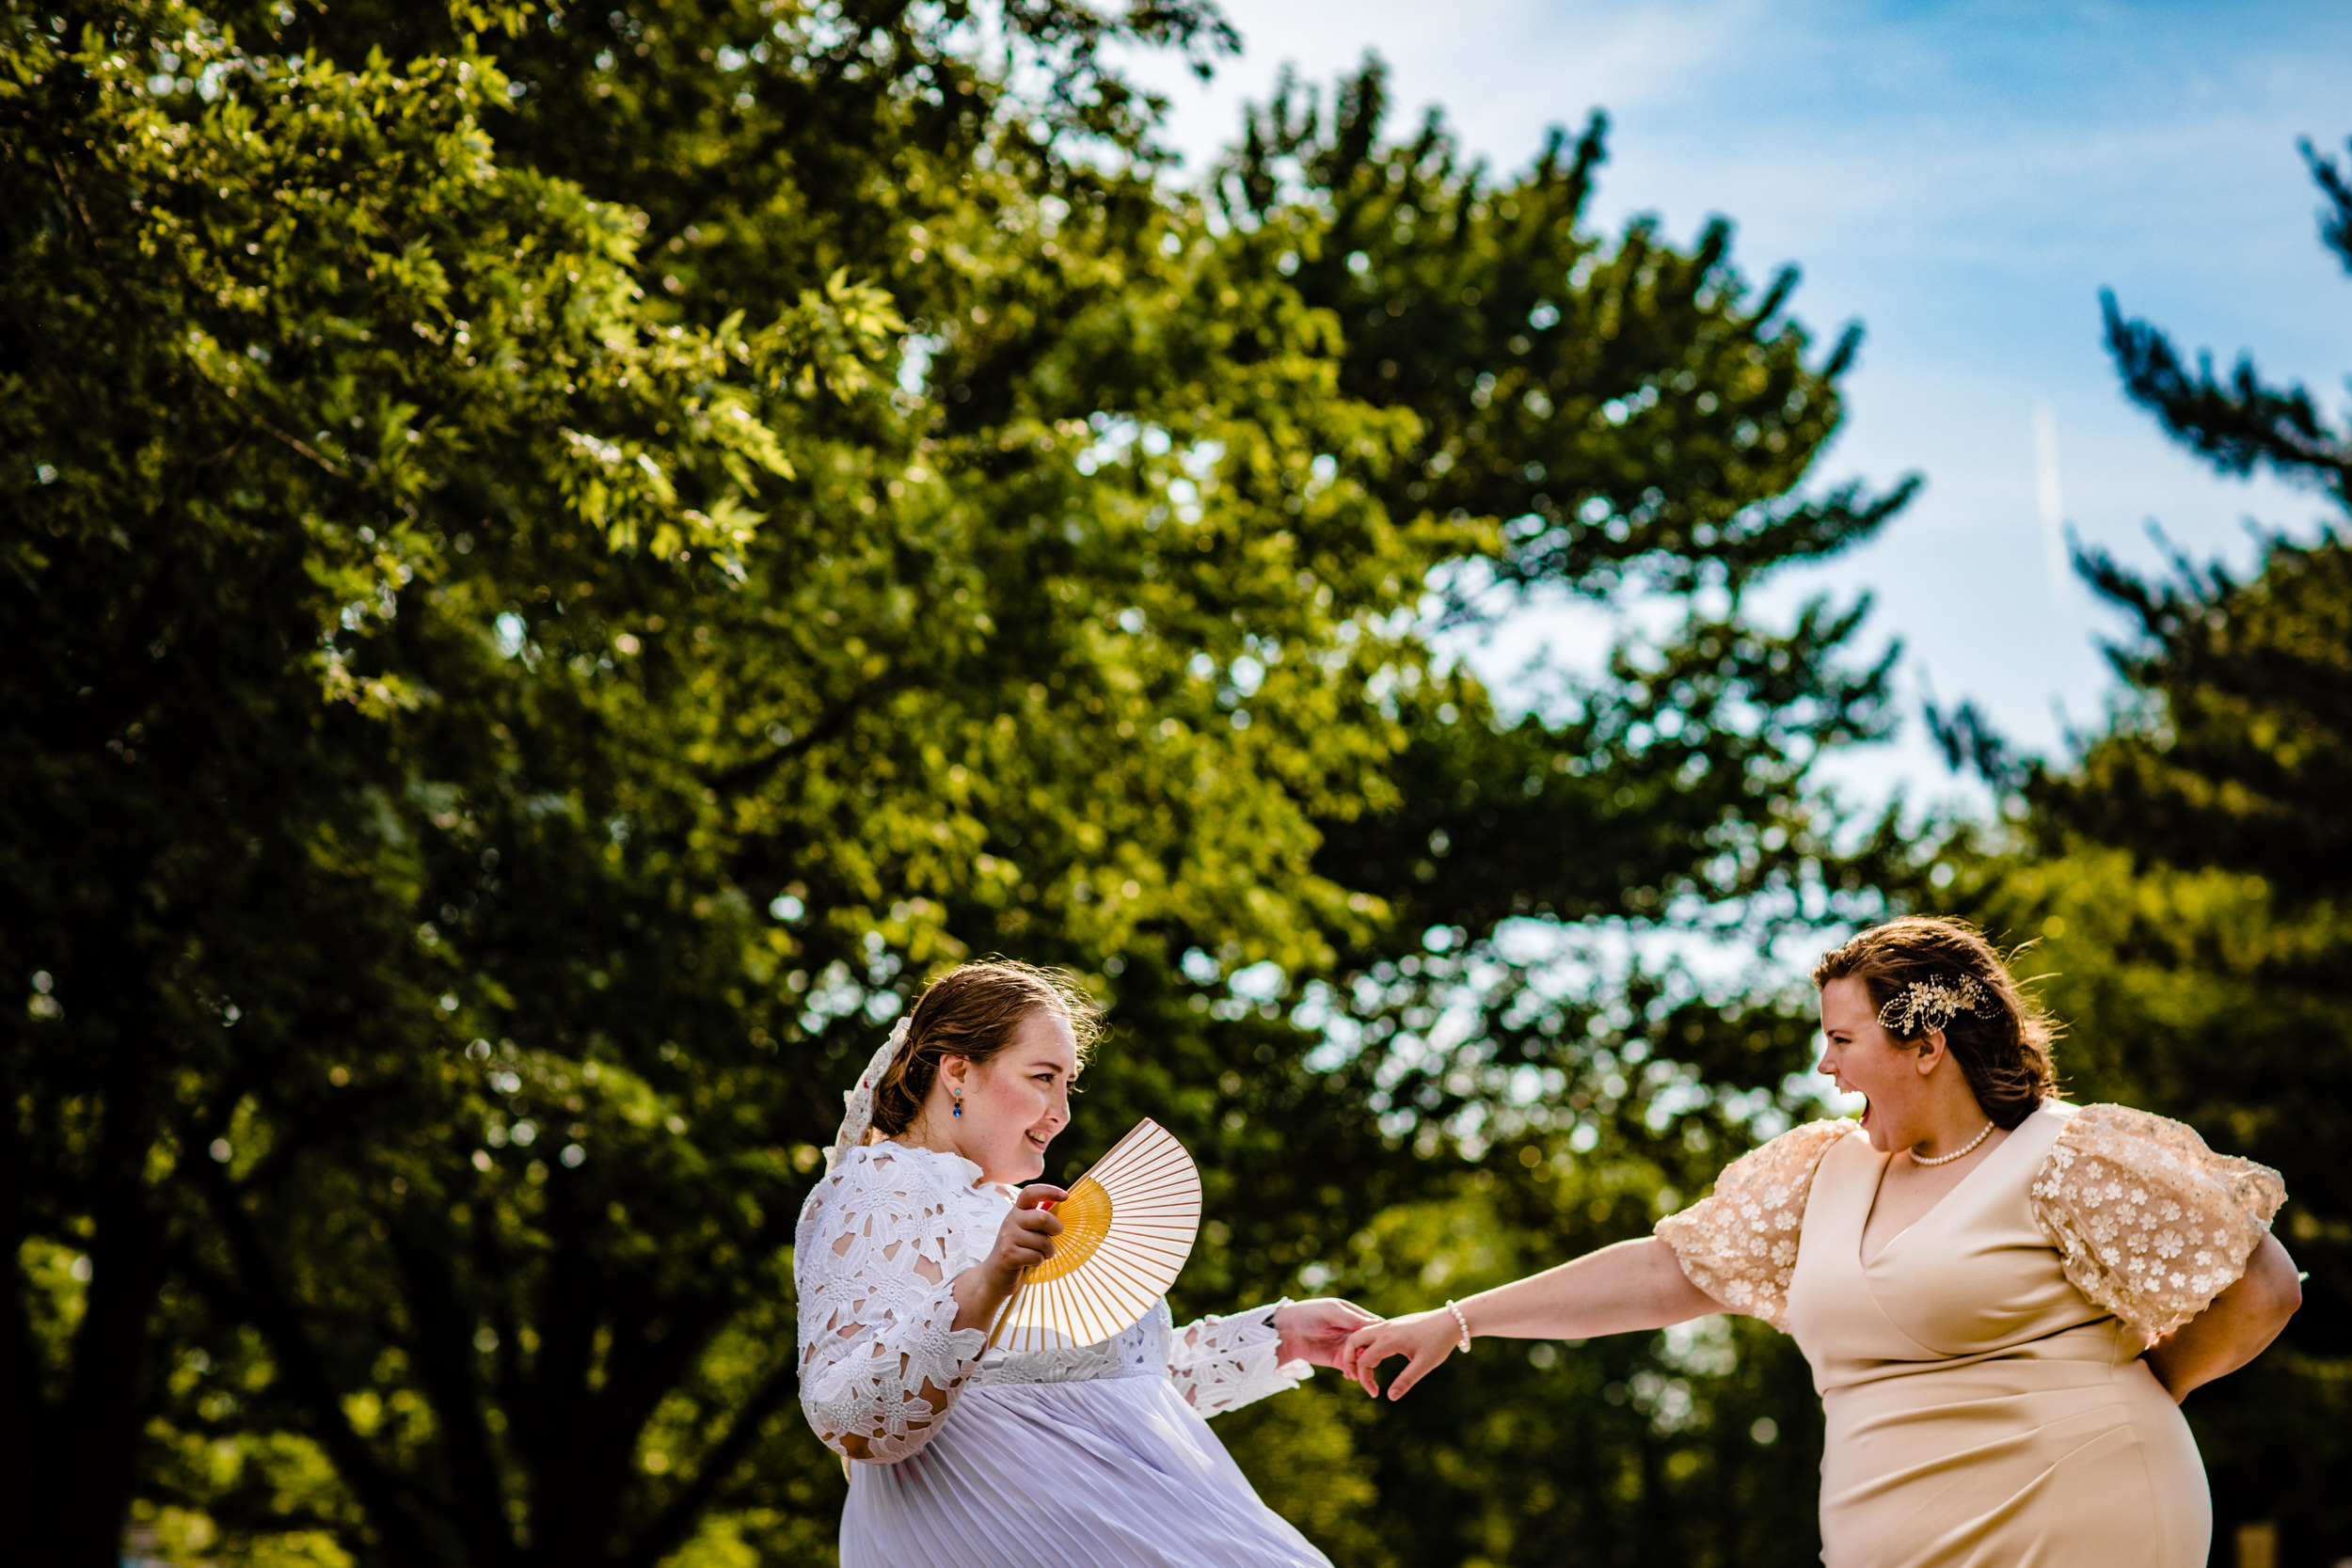 Brides dance together during a portrait session at a backyard wedding in New Lenox, Illinois.